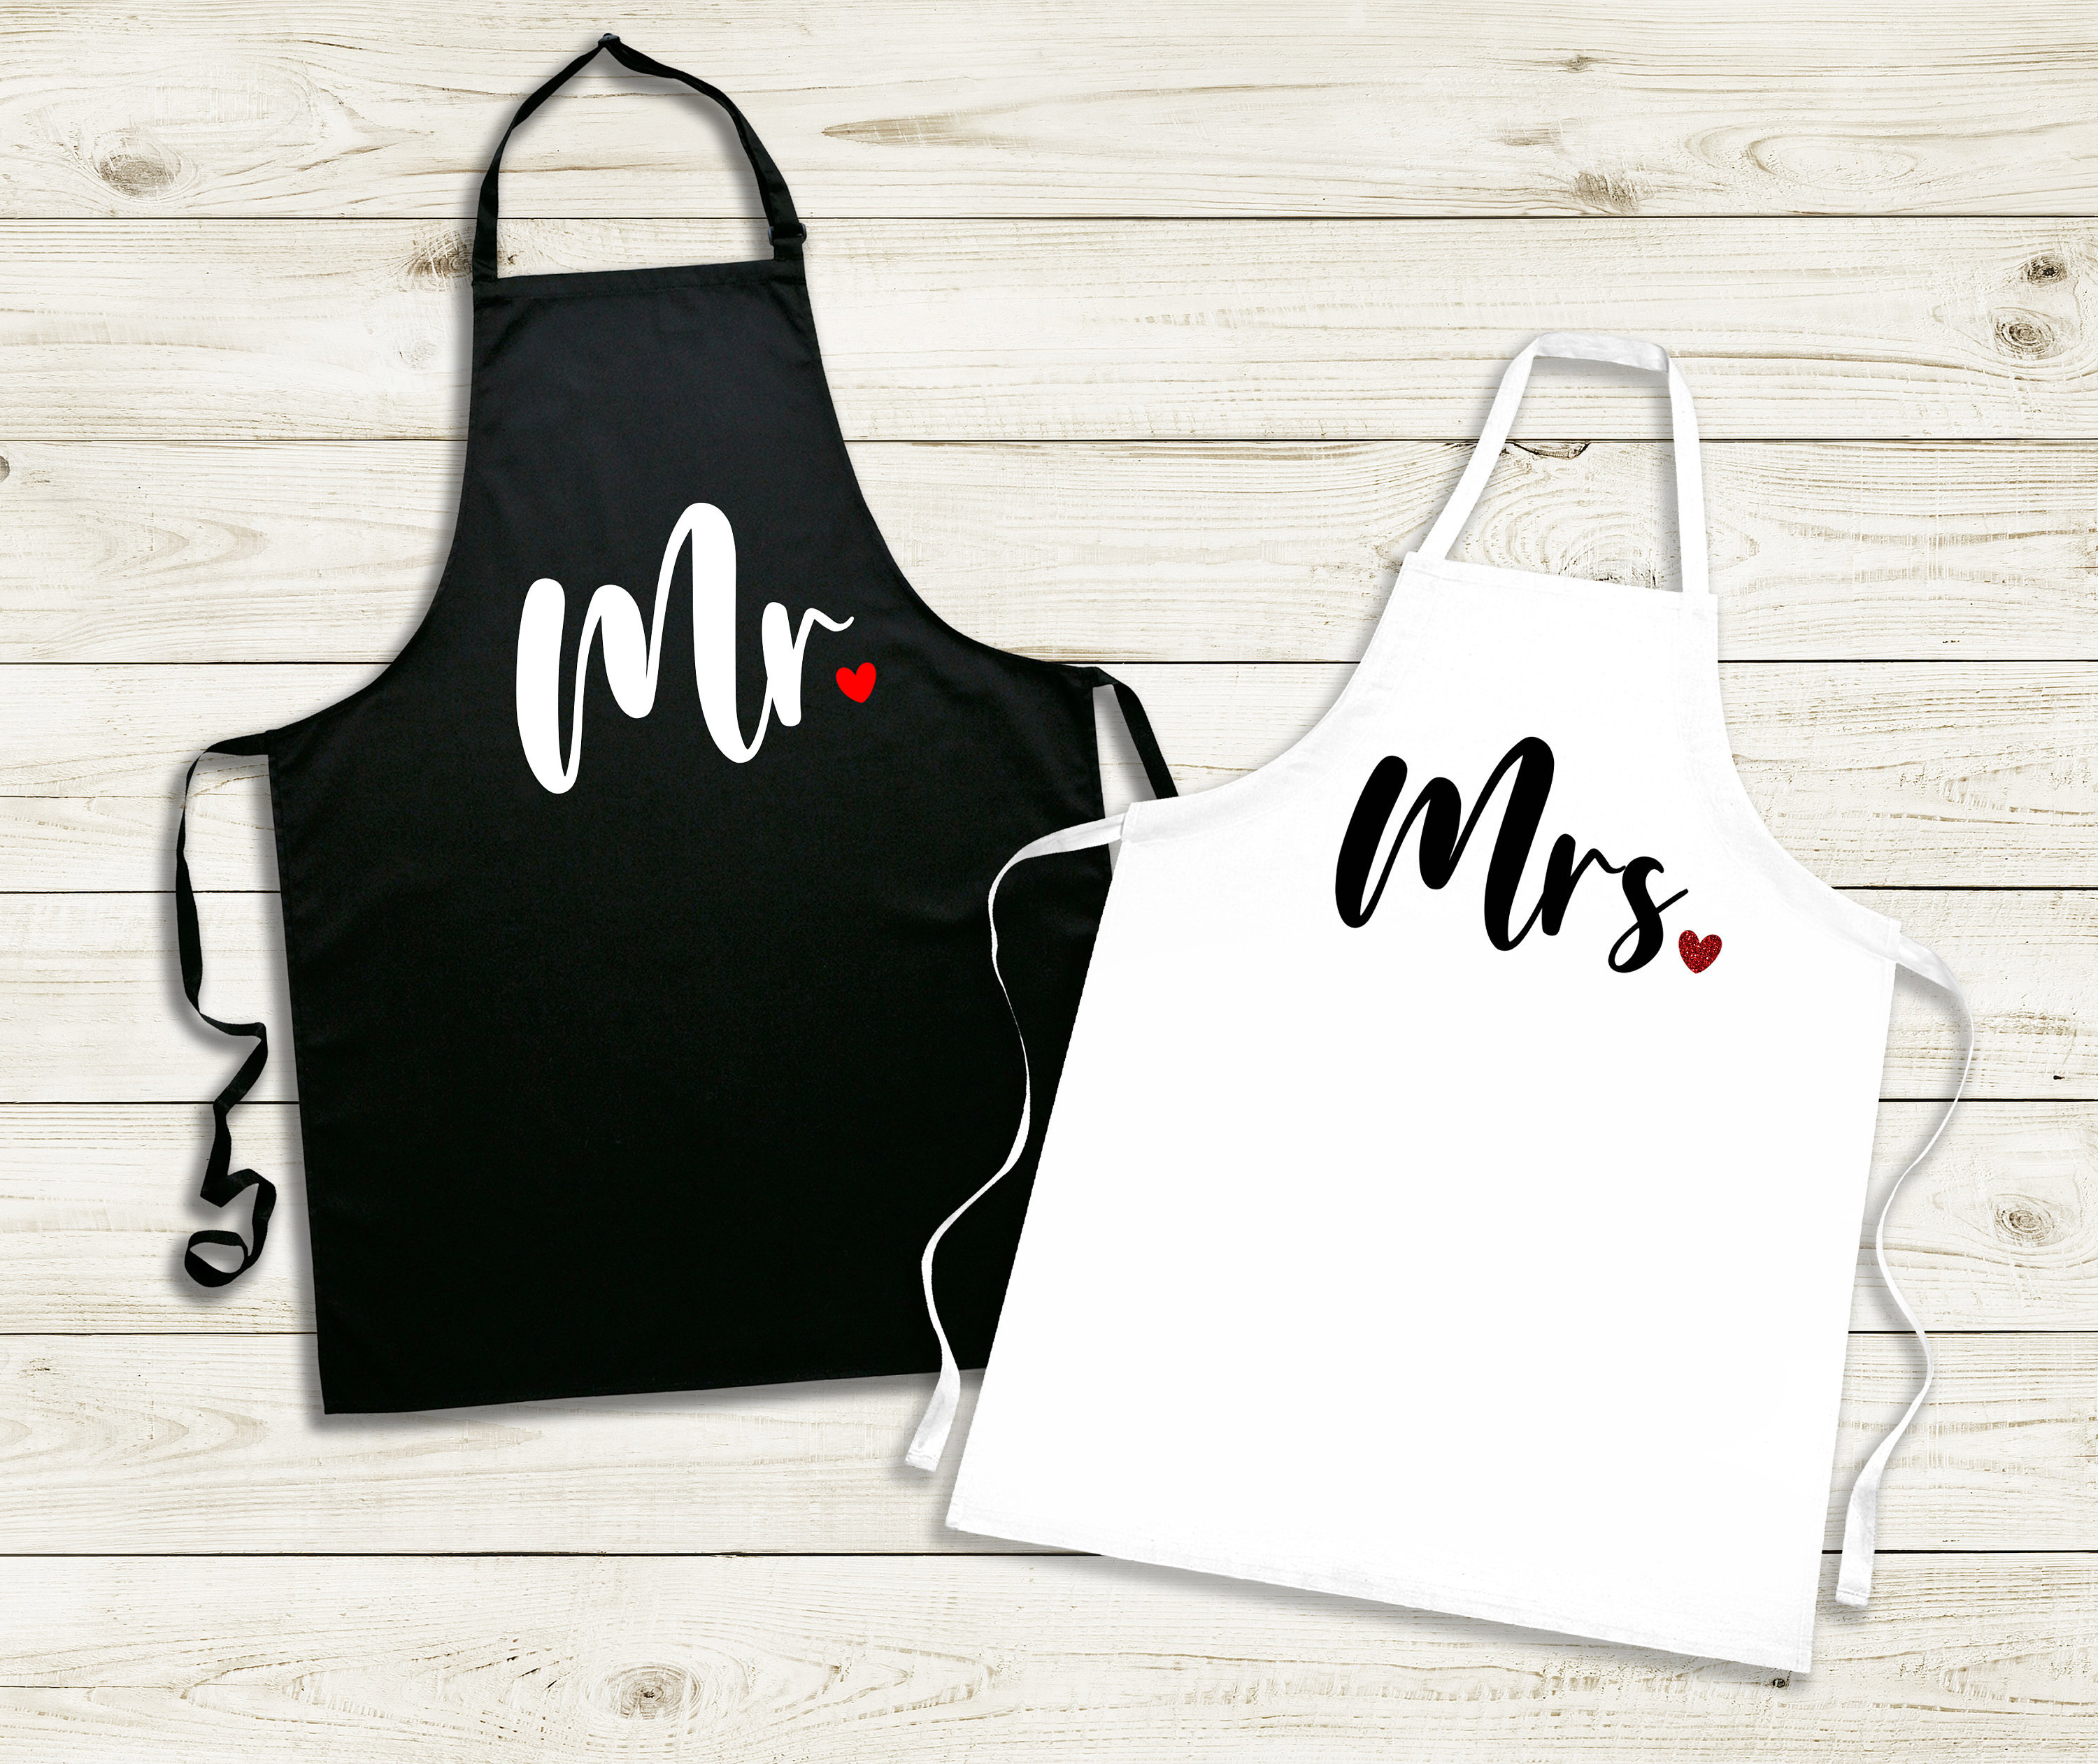 EUUPS Mr and Mrs Gifts for Couples Wedding Gift Engagement Gifts Bridal Shower Gift Christmas Gifts for Couple Kitchen Gift Set Couples Cooking